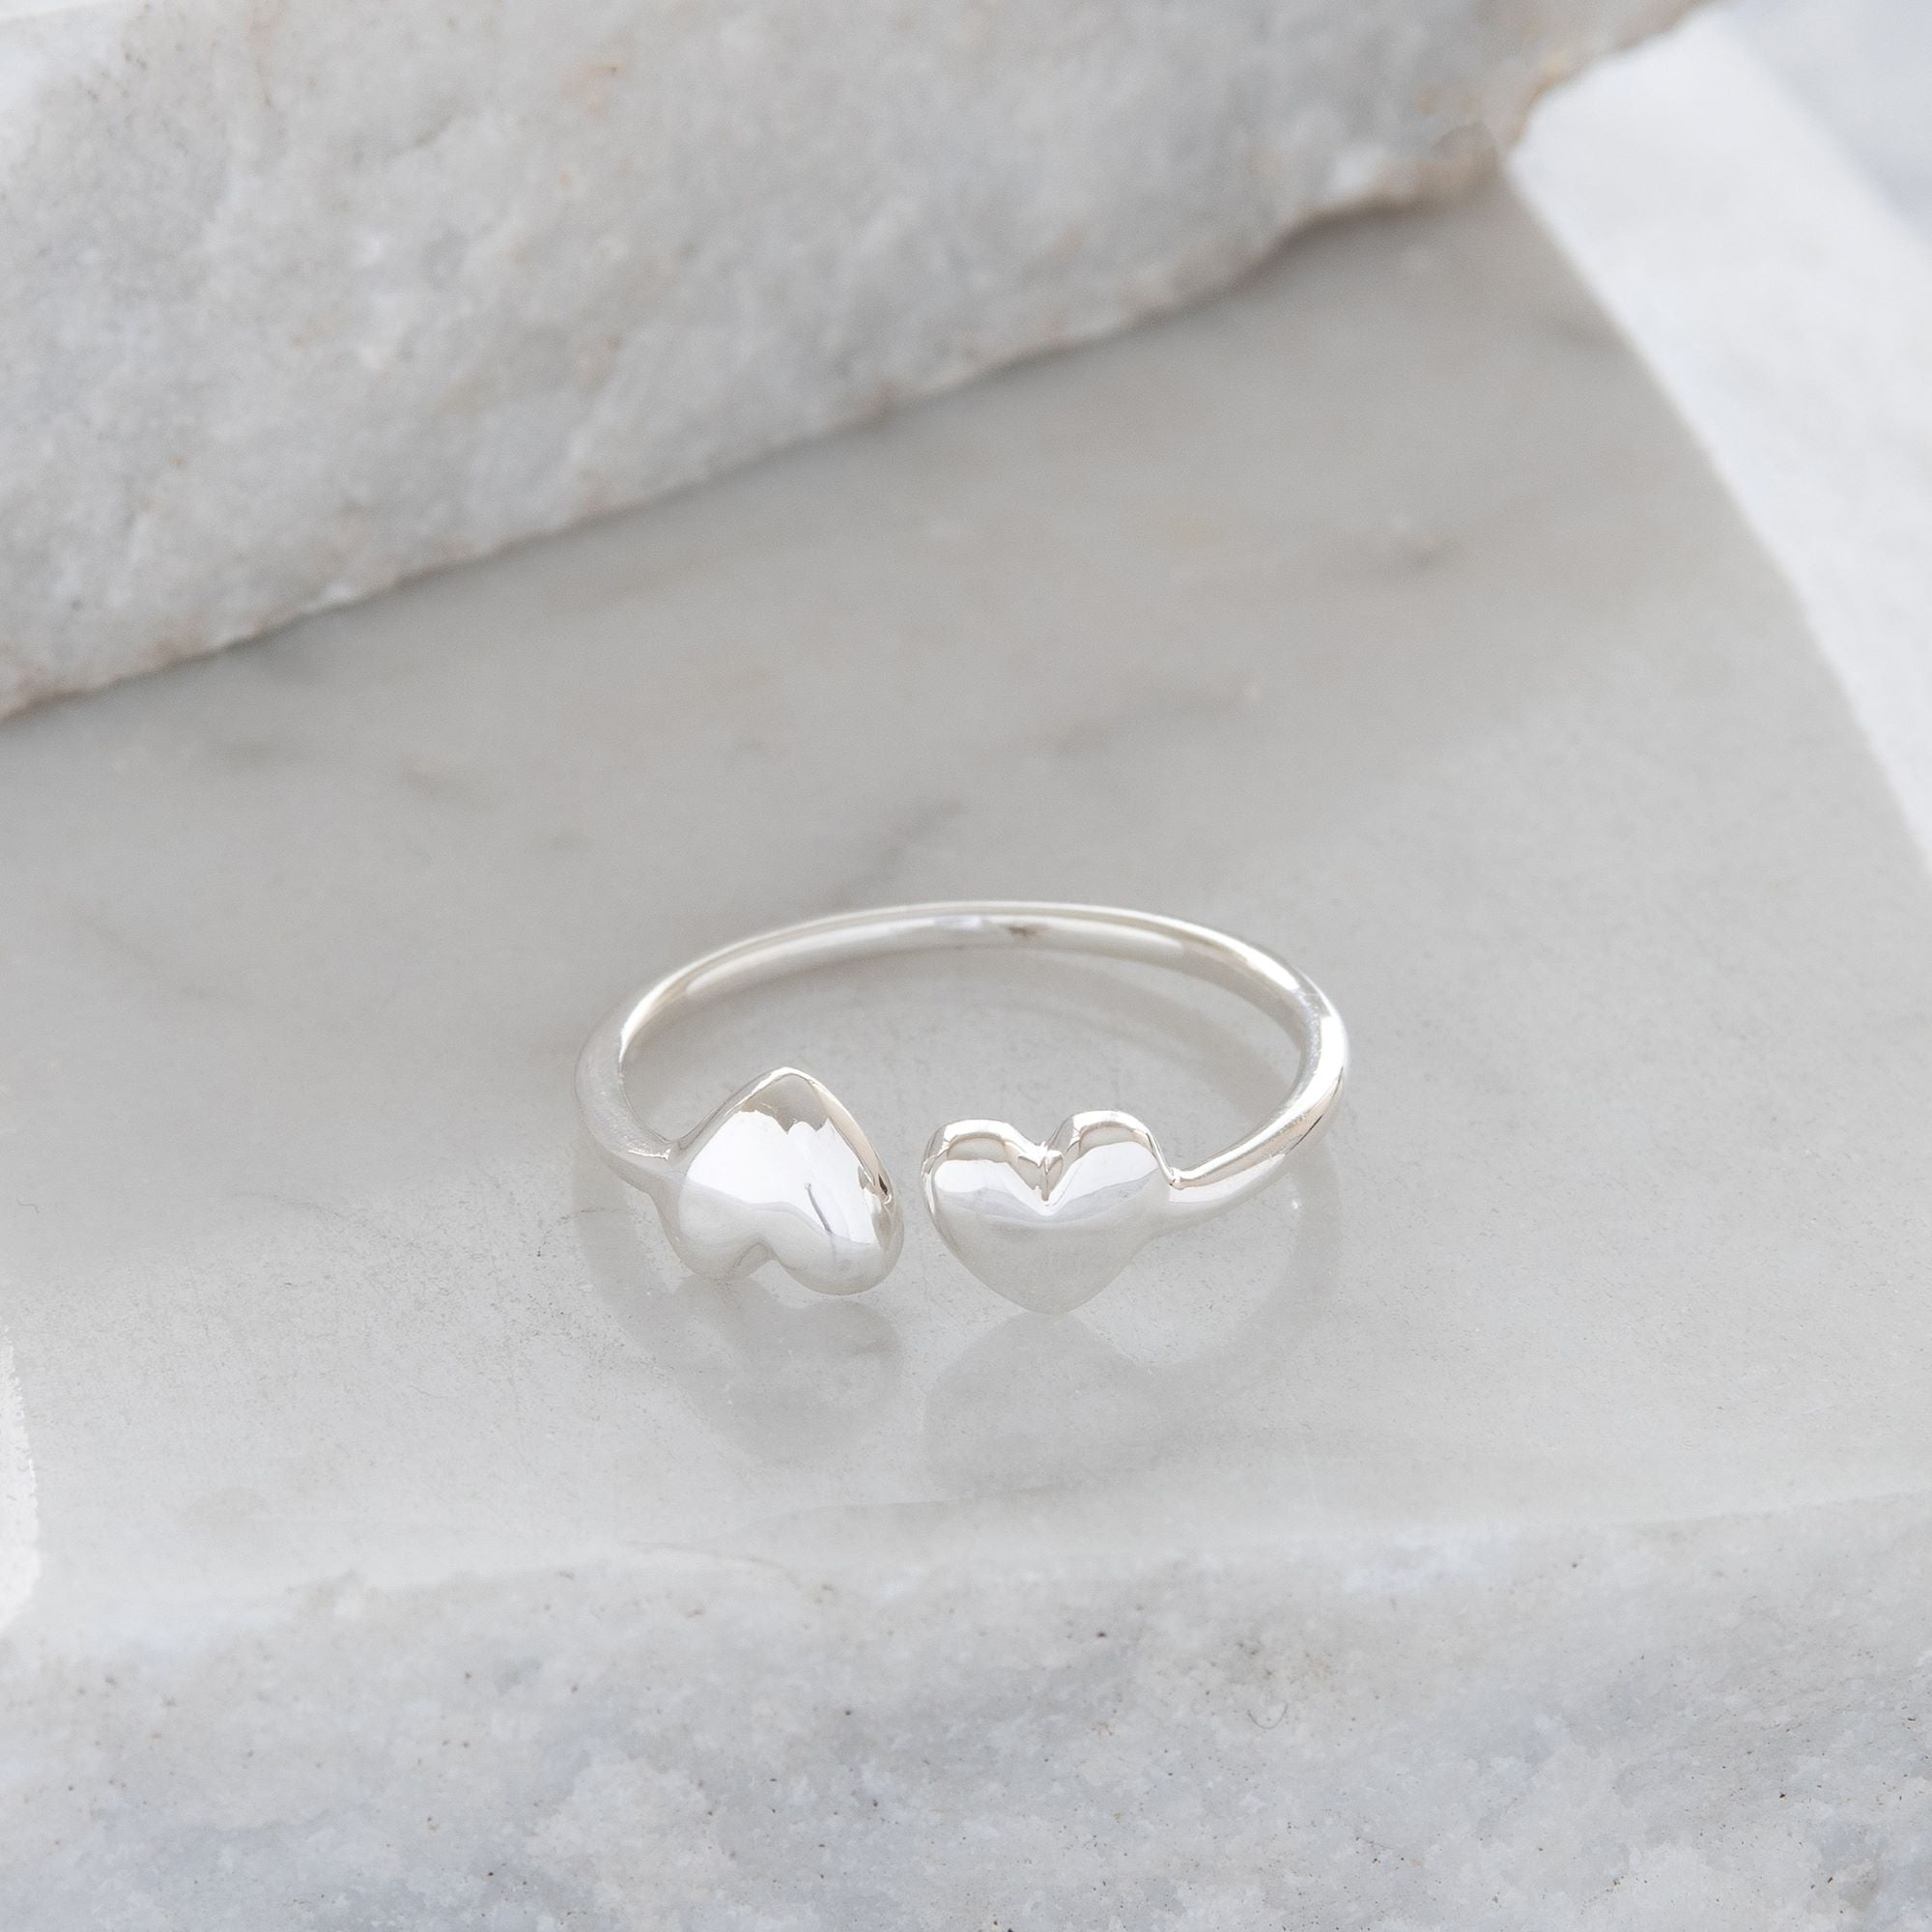 Adjustable Double Heart Charm Ring Sterling Silver